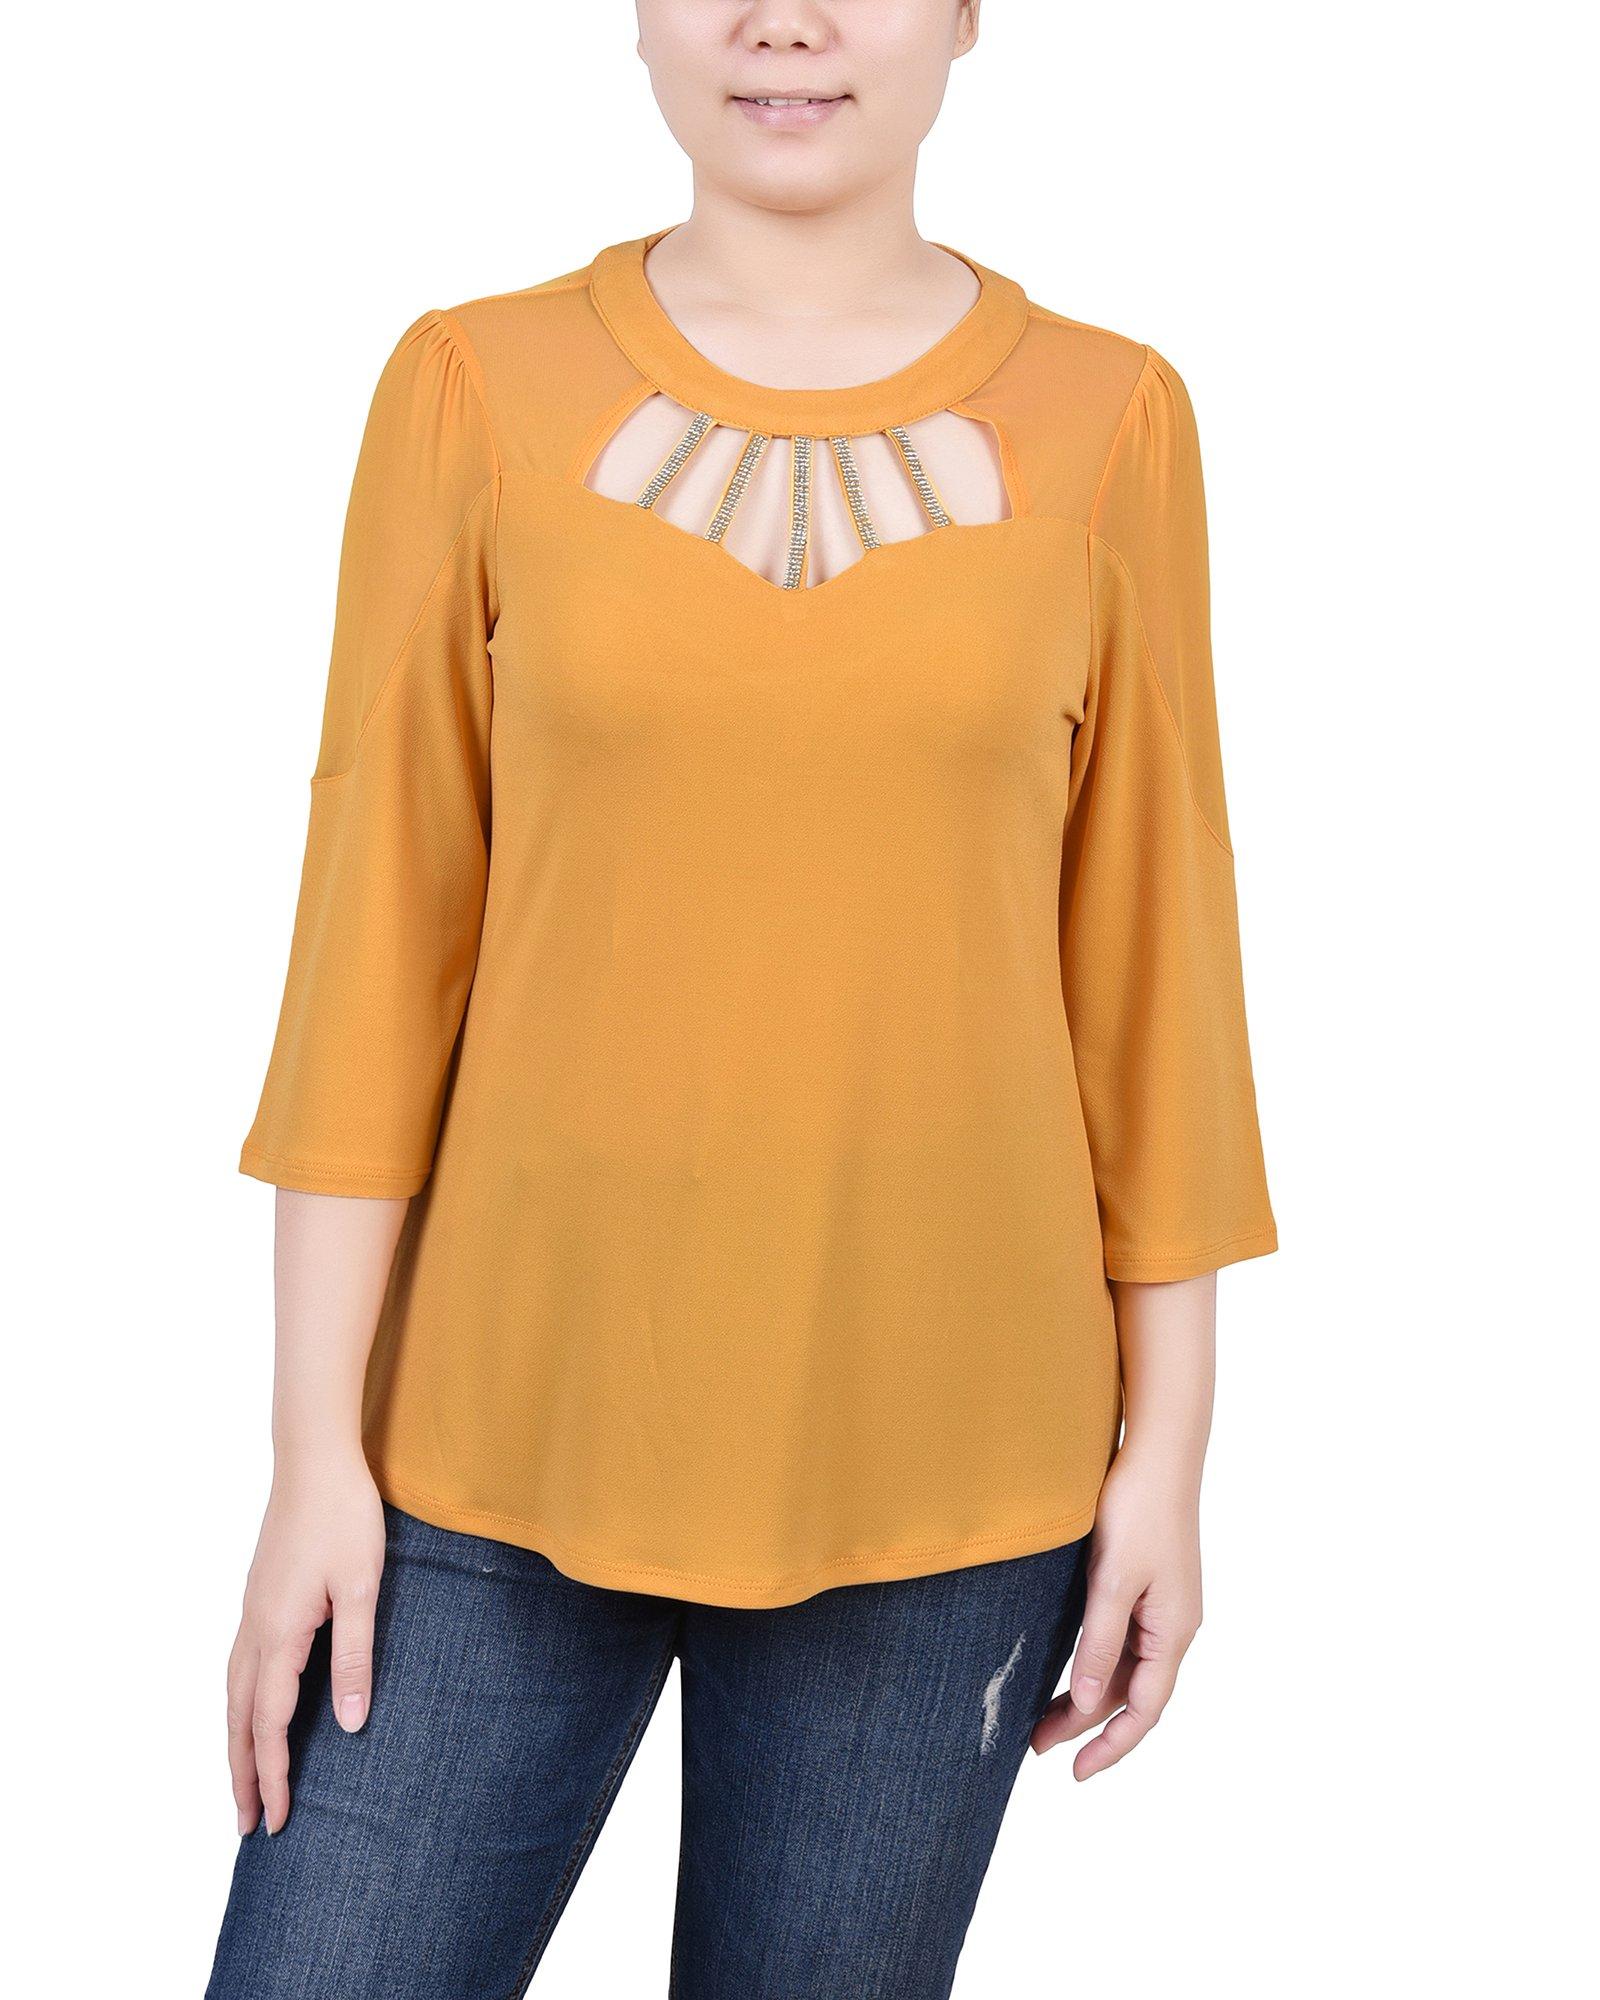 NY Collection Petite 3/4 Sleeve Cutout Neckline Top